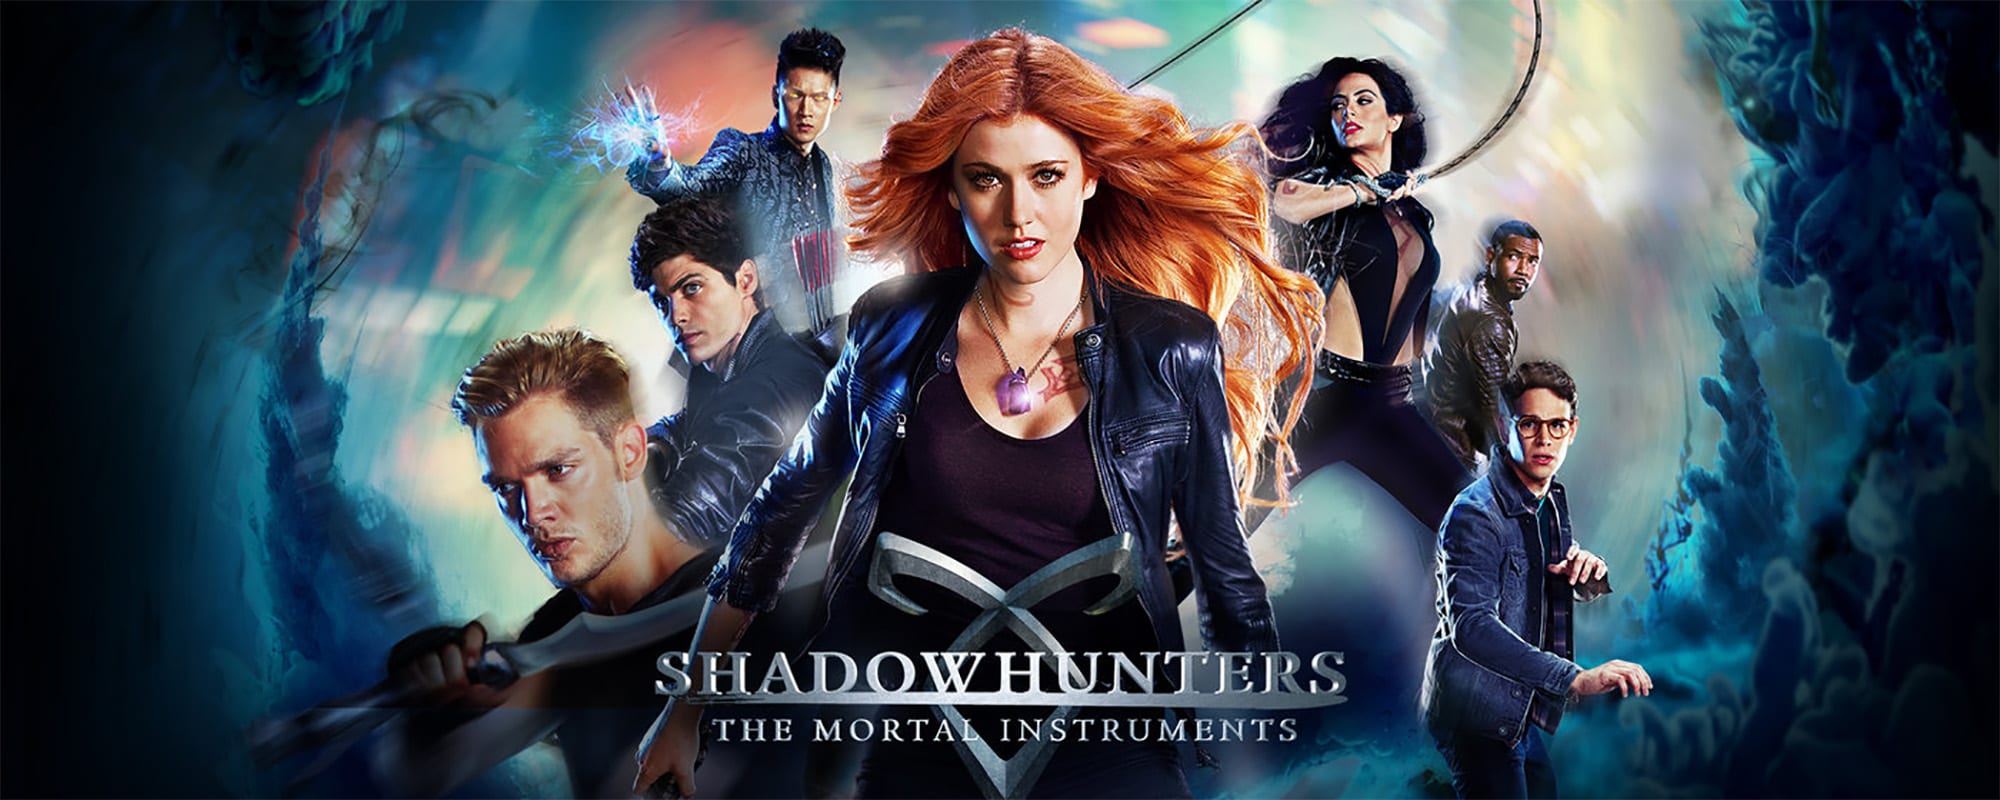 Freeform isn’t a villain, but it certainly has the potential to be a good guy and do the right thing in saving 'Shadowhunters'.